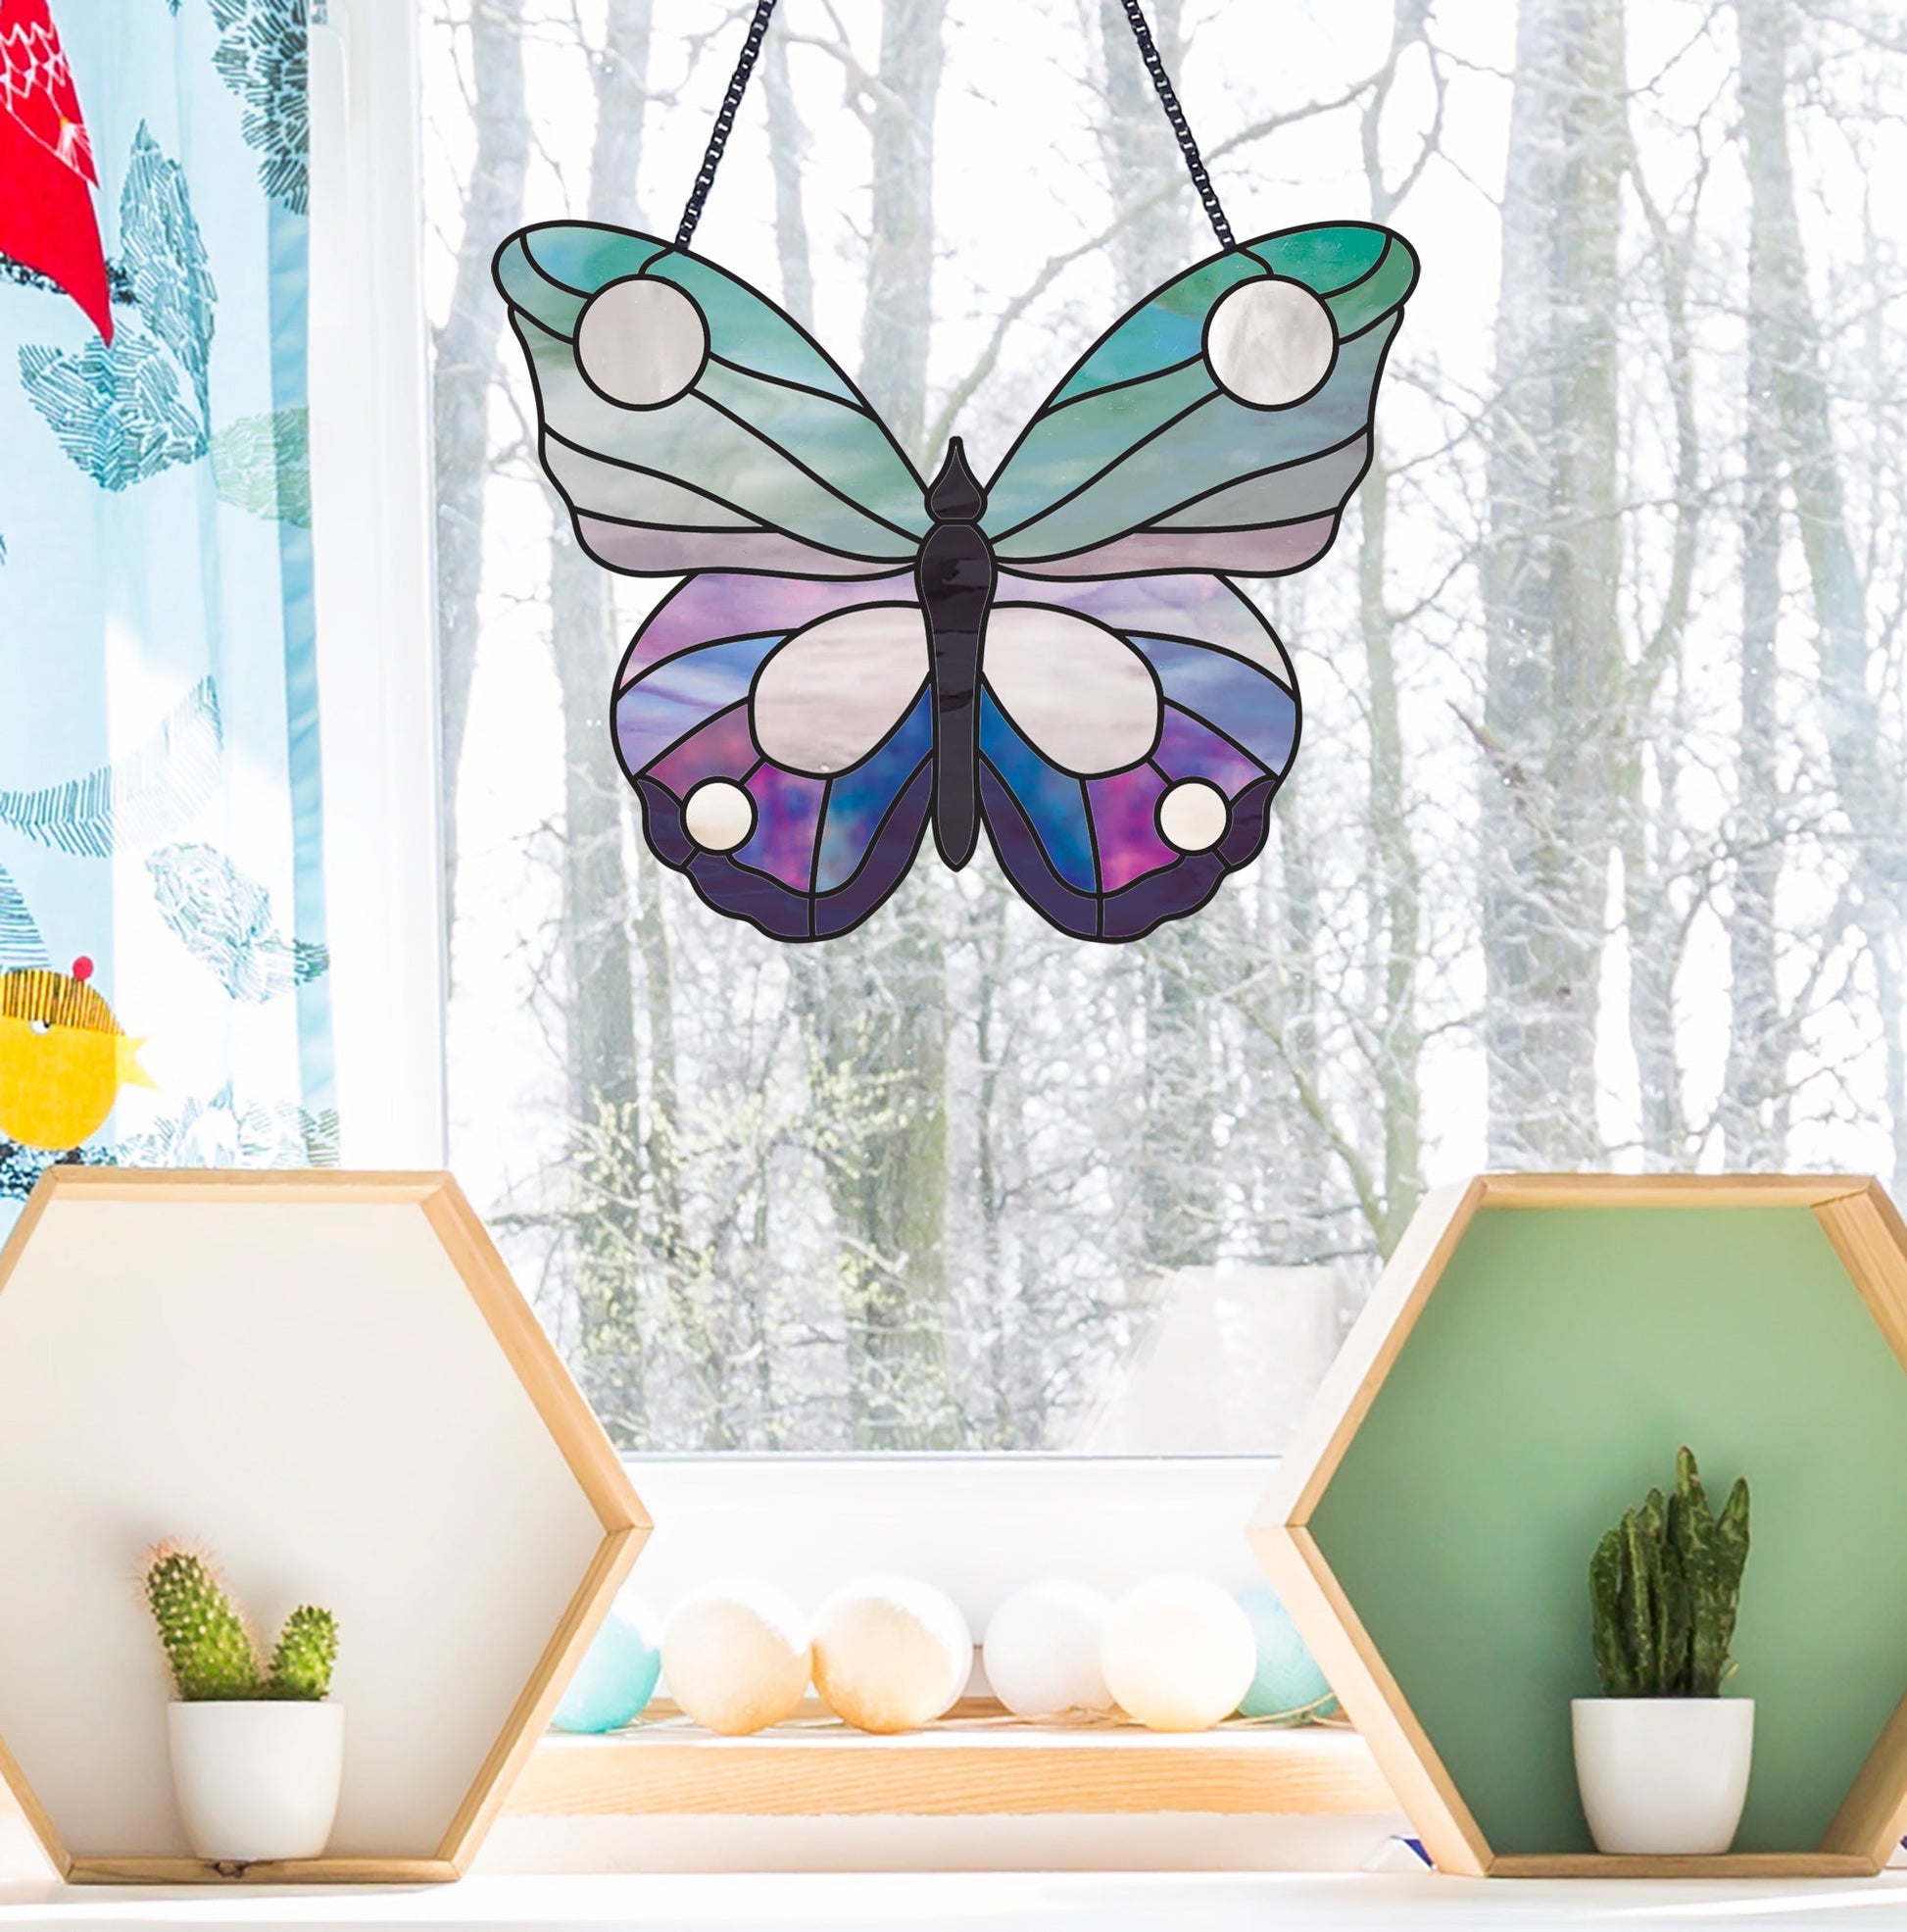 Butterfly stained glass patterns, pack of five, instant download, one butterfly shown in window with snowy background